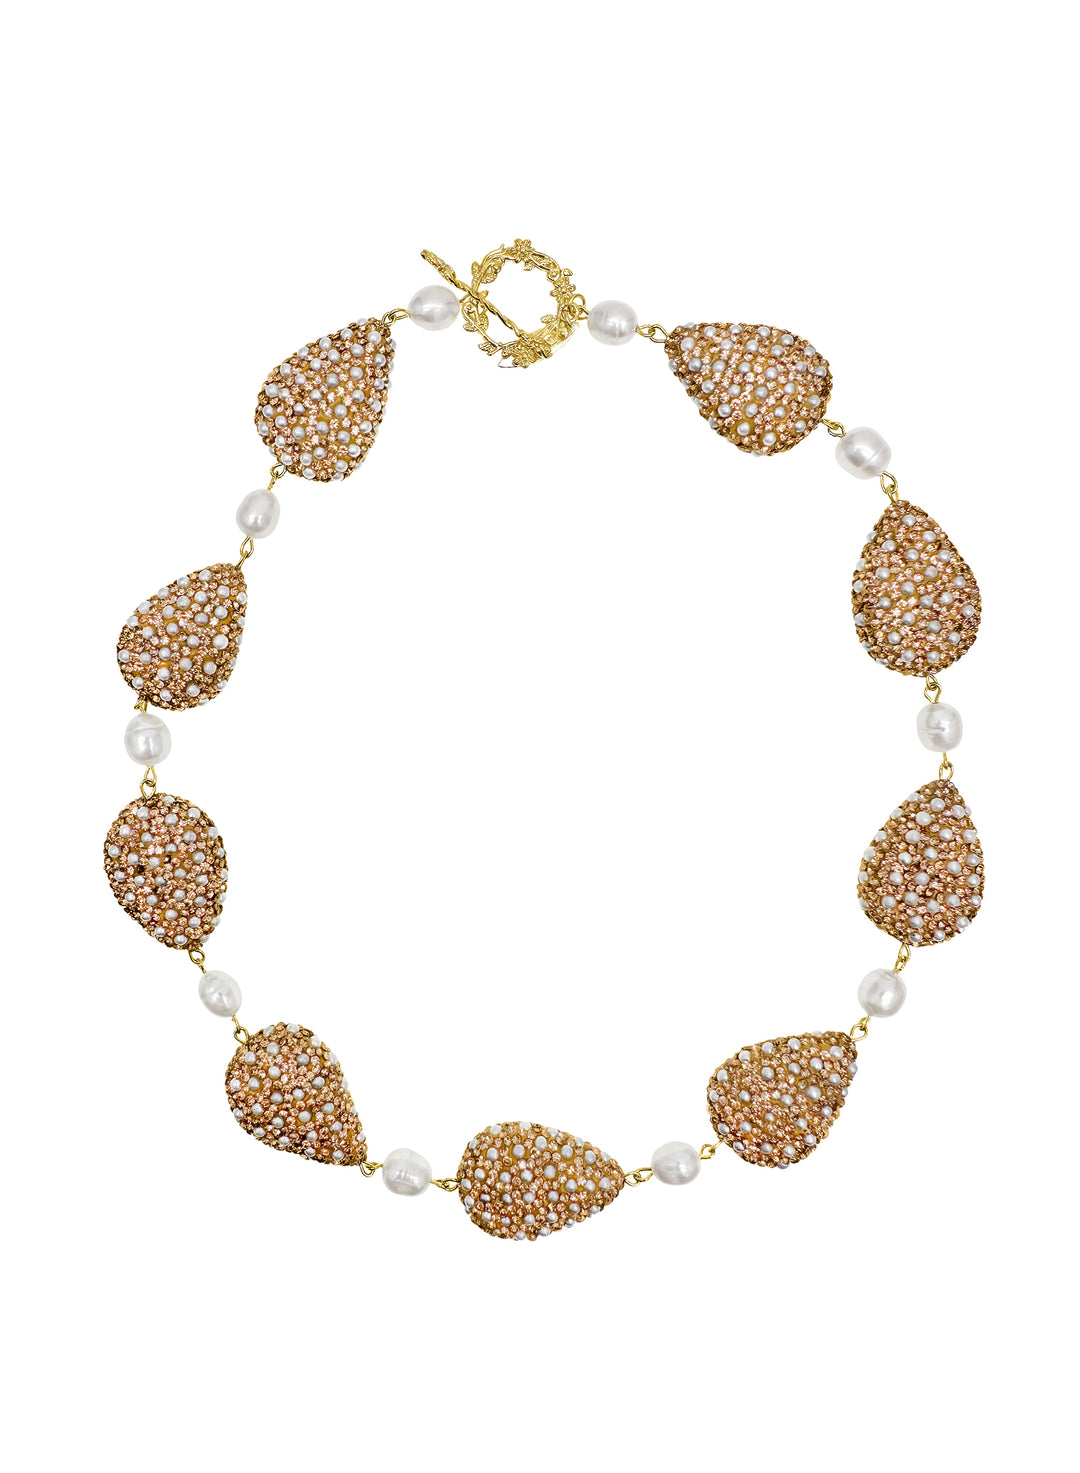 Rhinestone with Freshwater Pearls Statement Necklace LN077 - FARRA